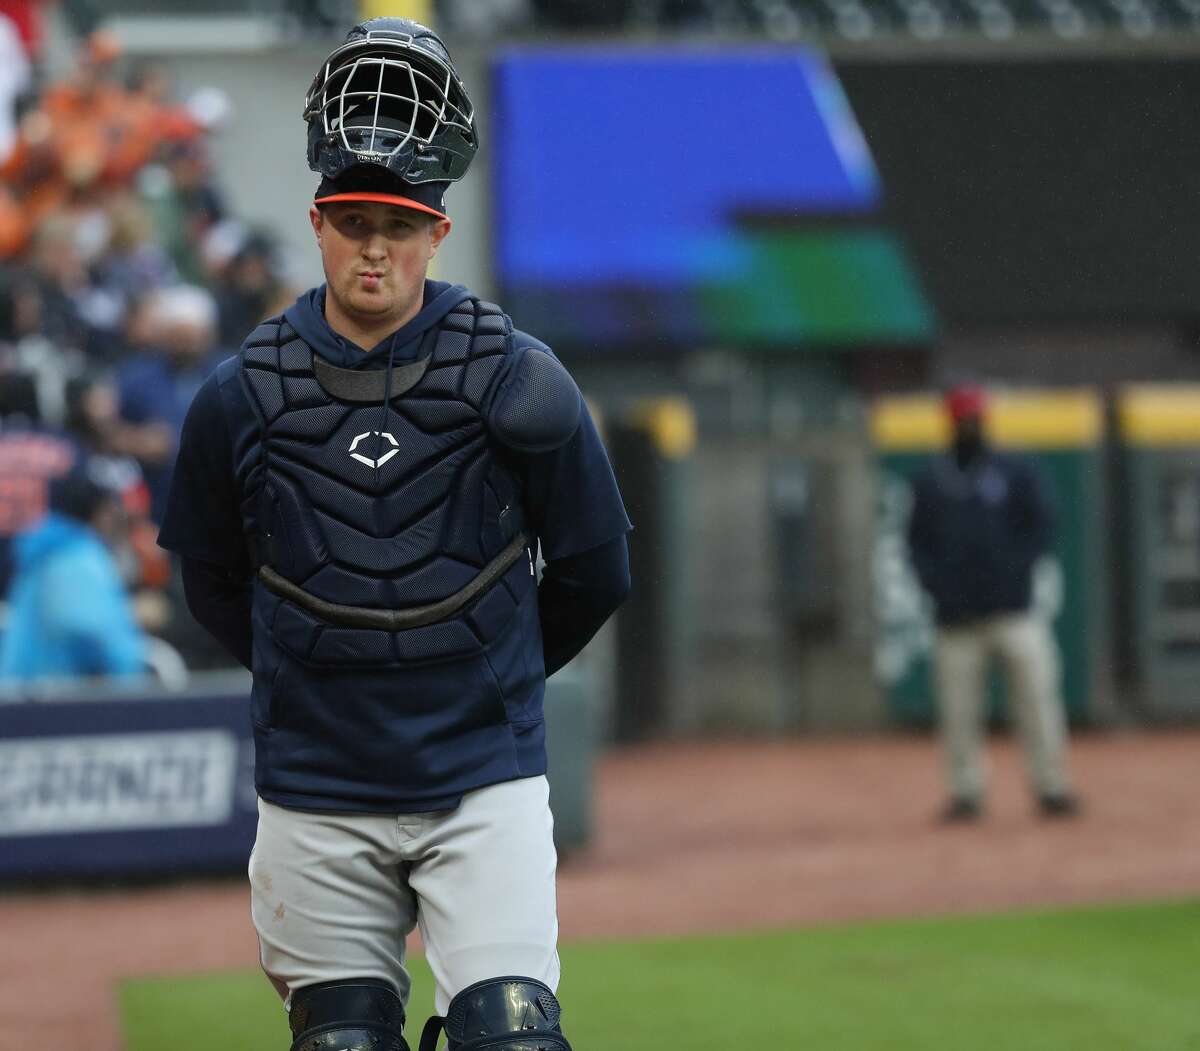 The Astros thought enough of catcher Michael Papierski to add him to the taxi squad during the 2021 postseason. Now, he's trying to work his way toward his major league debut.